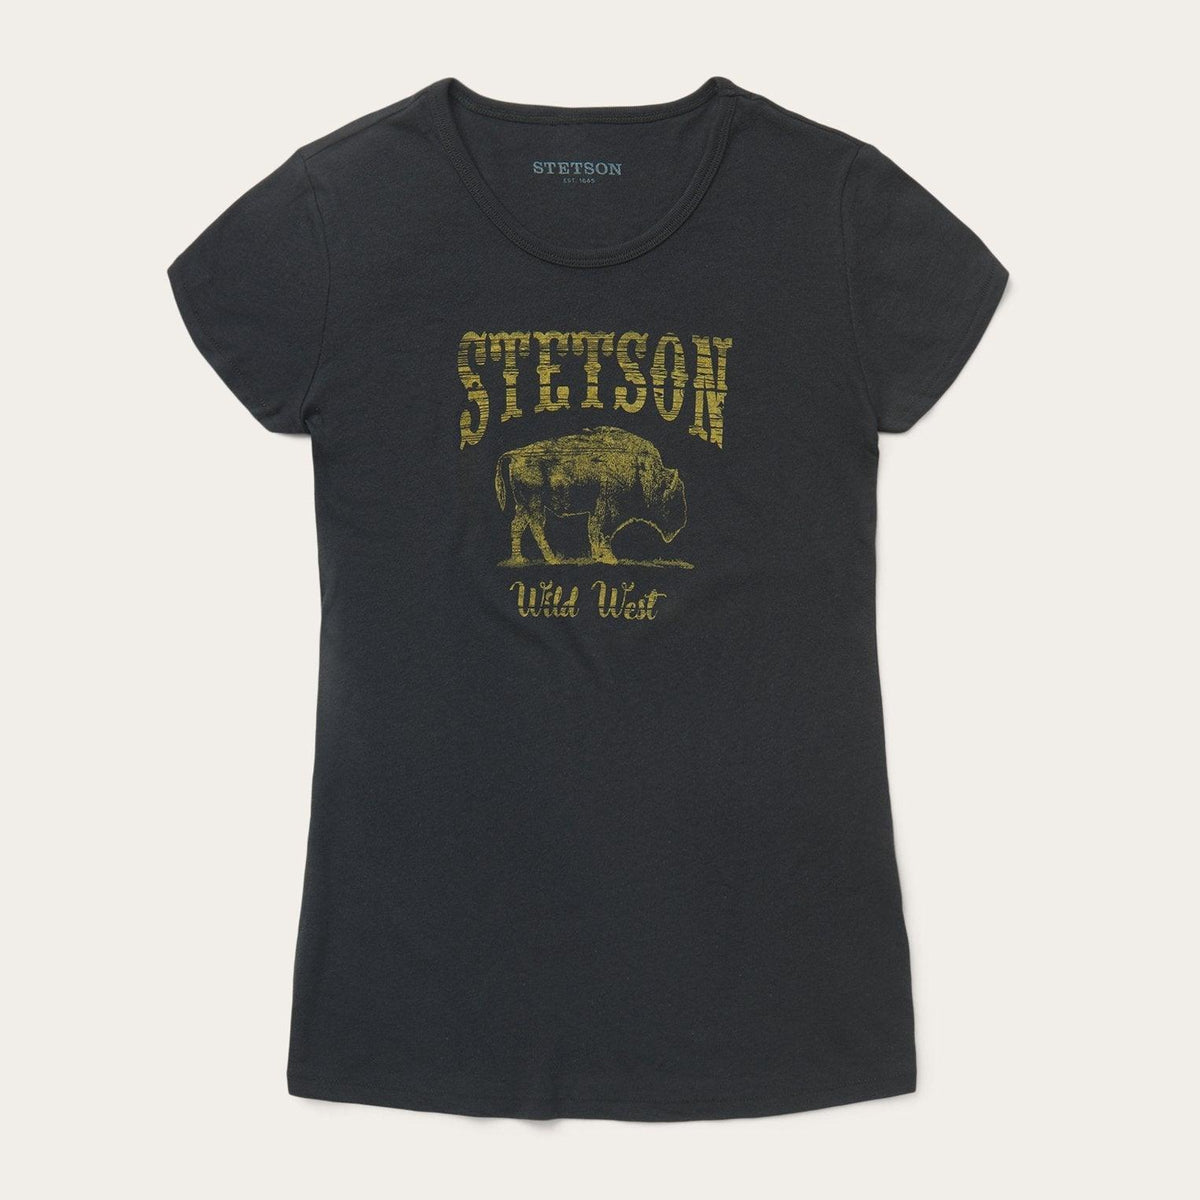 Stetson Bison Graphic Tee - Flyclothing LLC